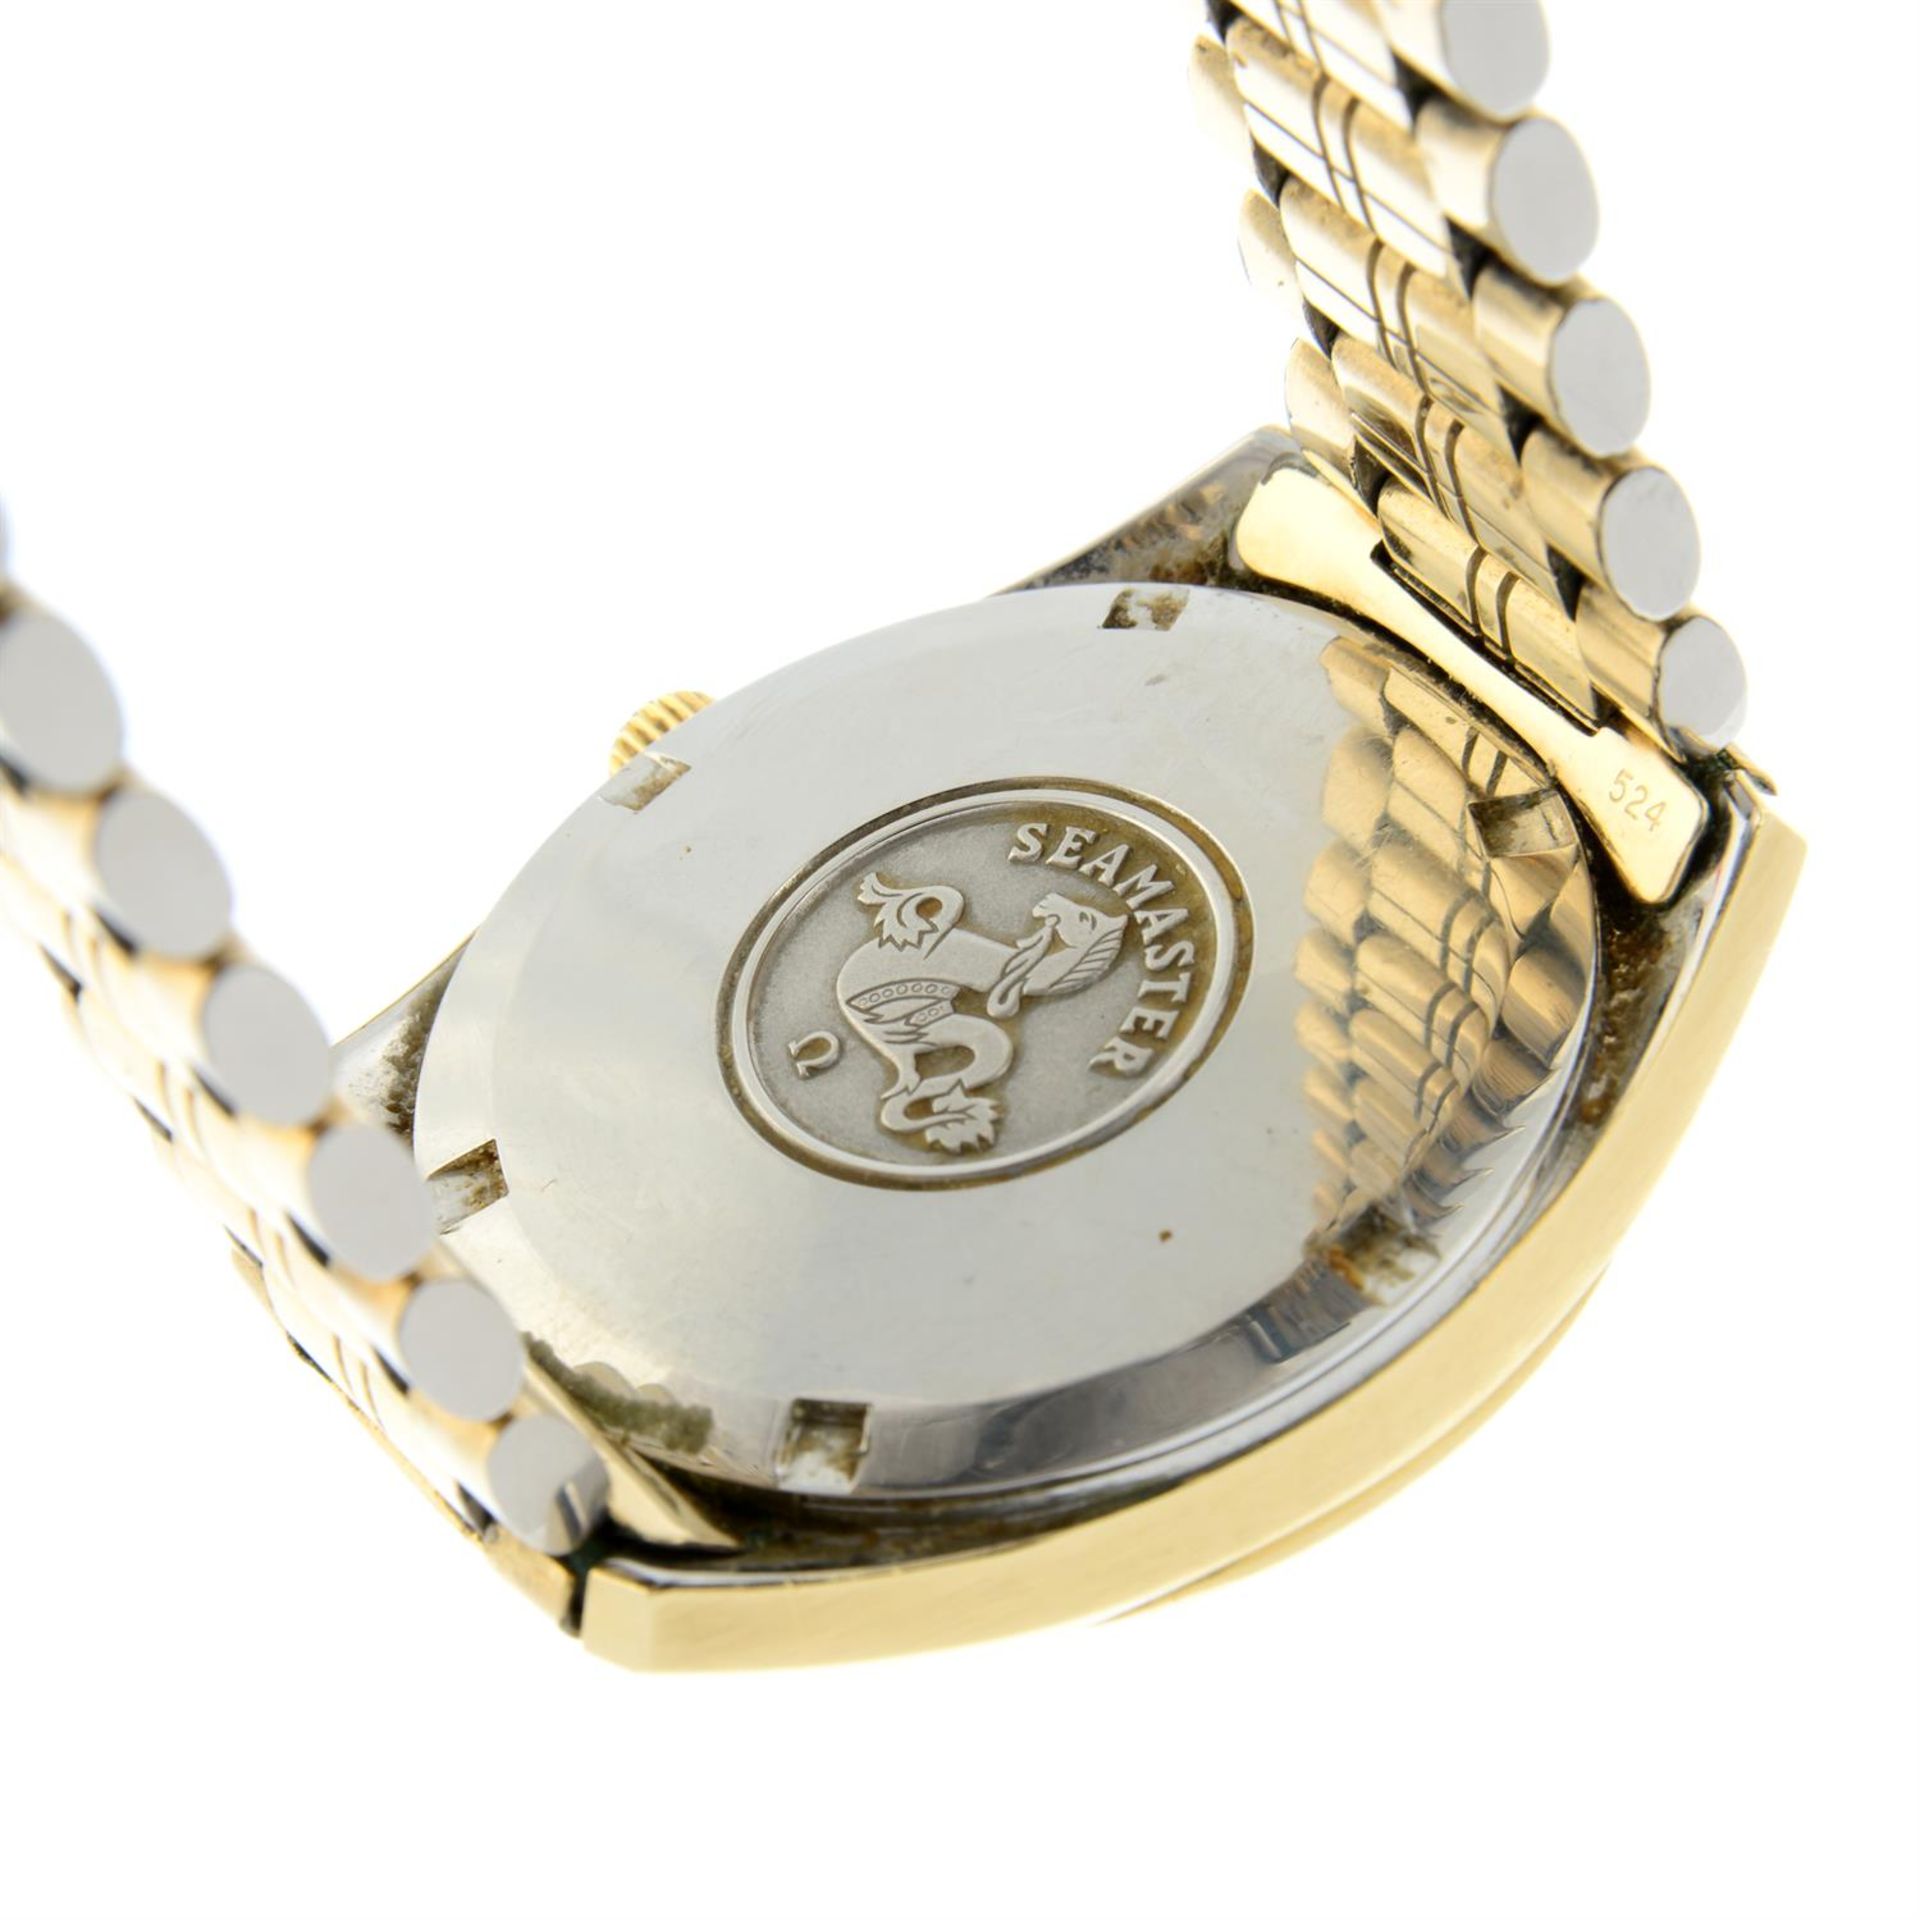 OMEGA - a gold plated Seamaster bracelet watch, 36mm. - Image 4 of 5